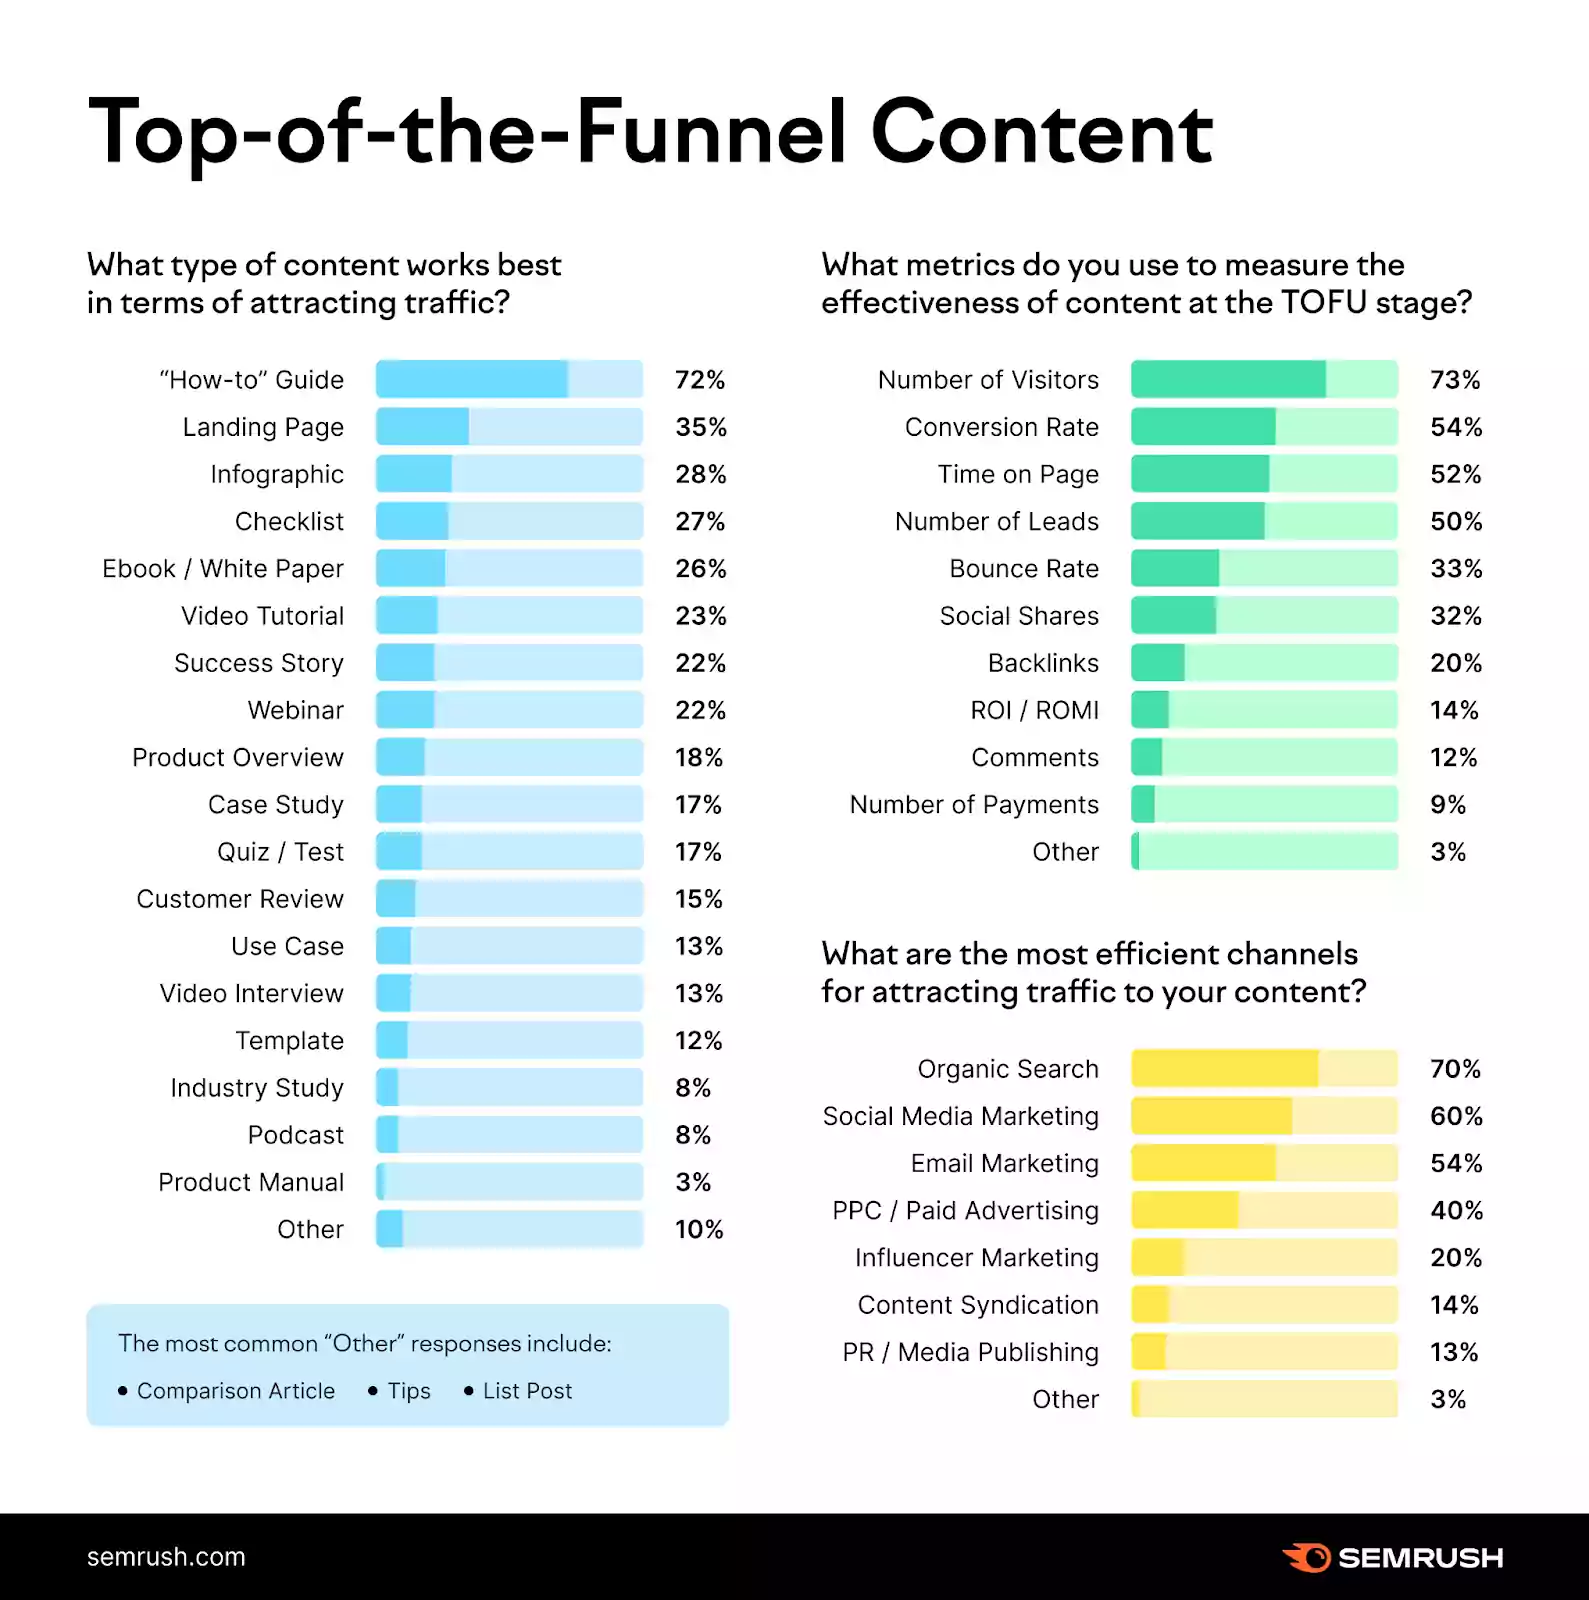 Top of the funnel content